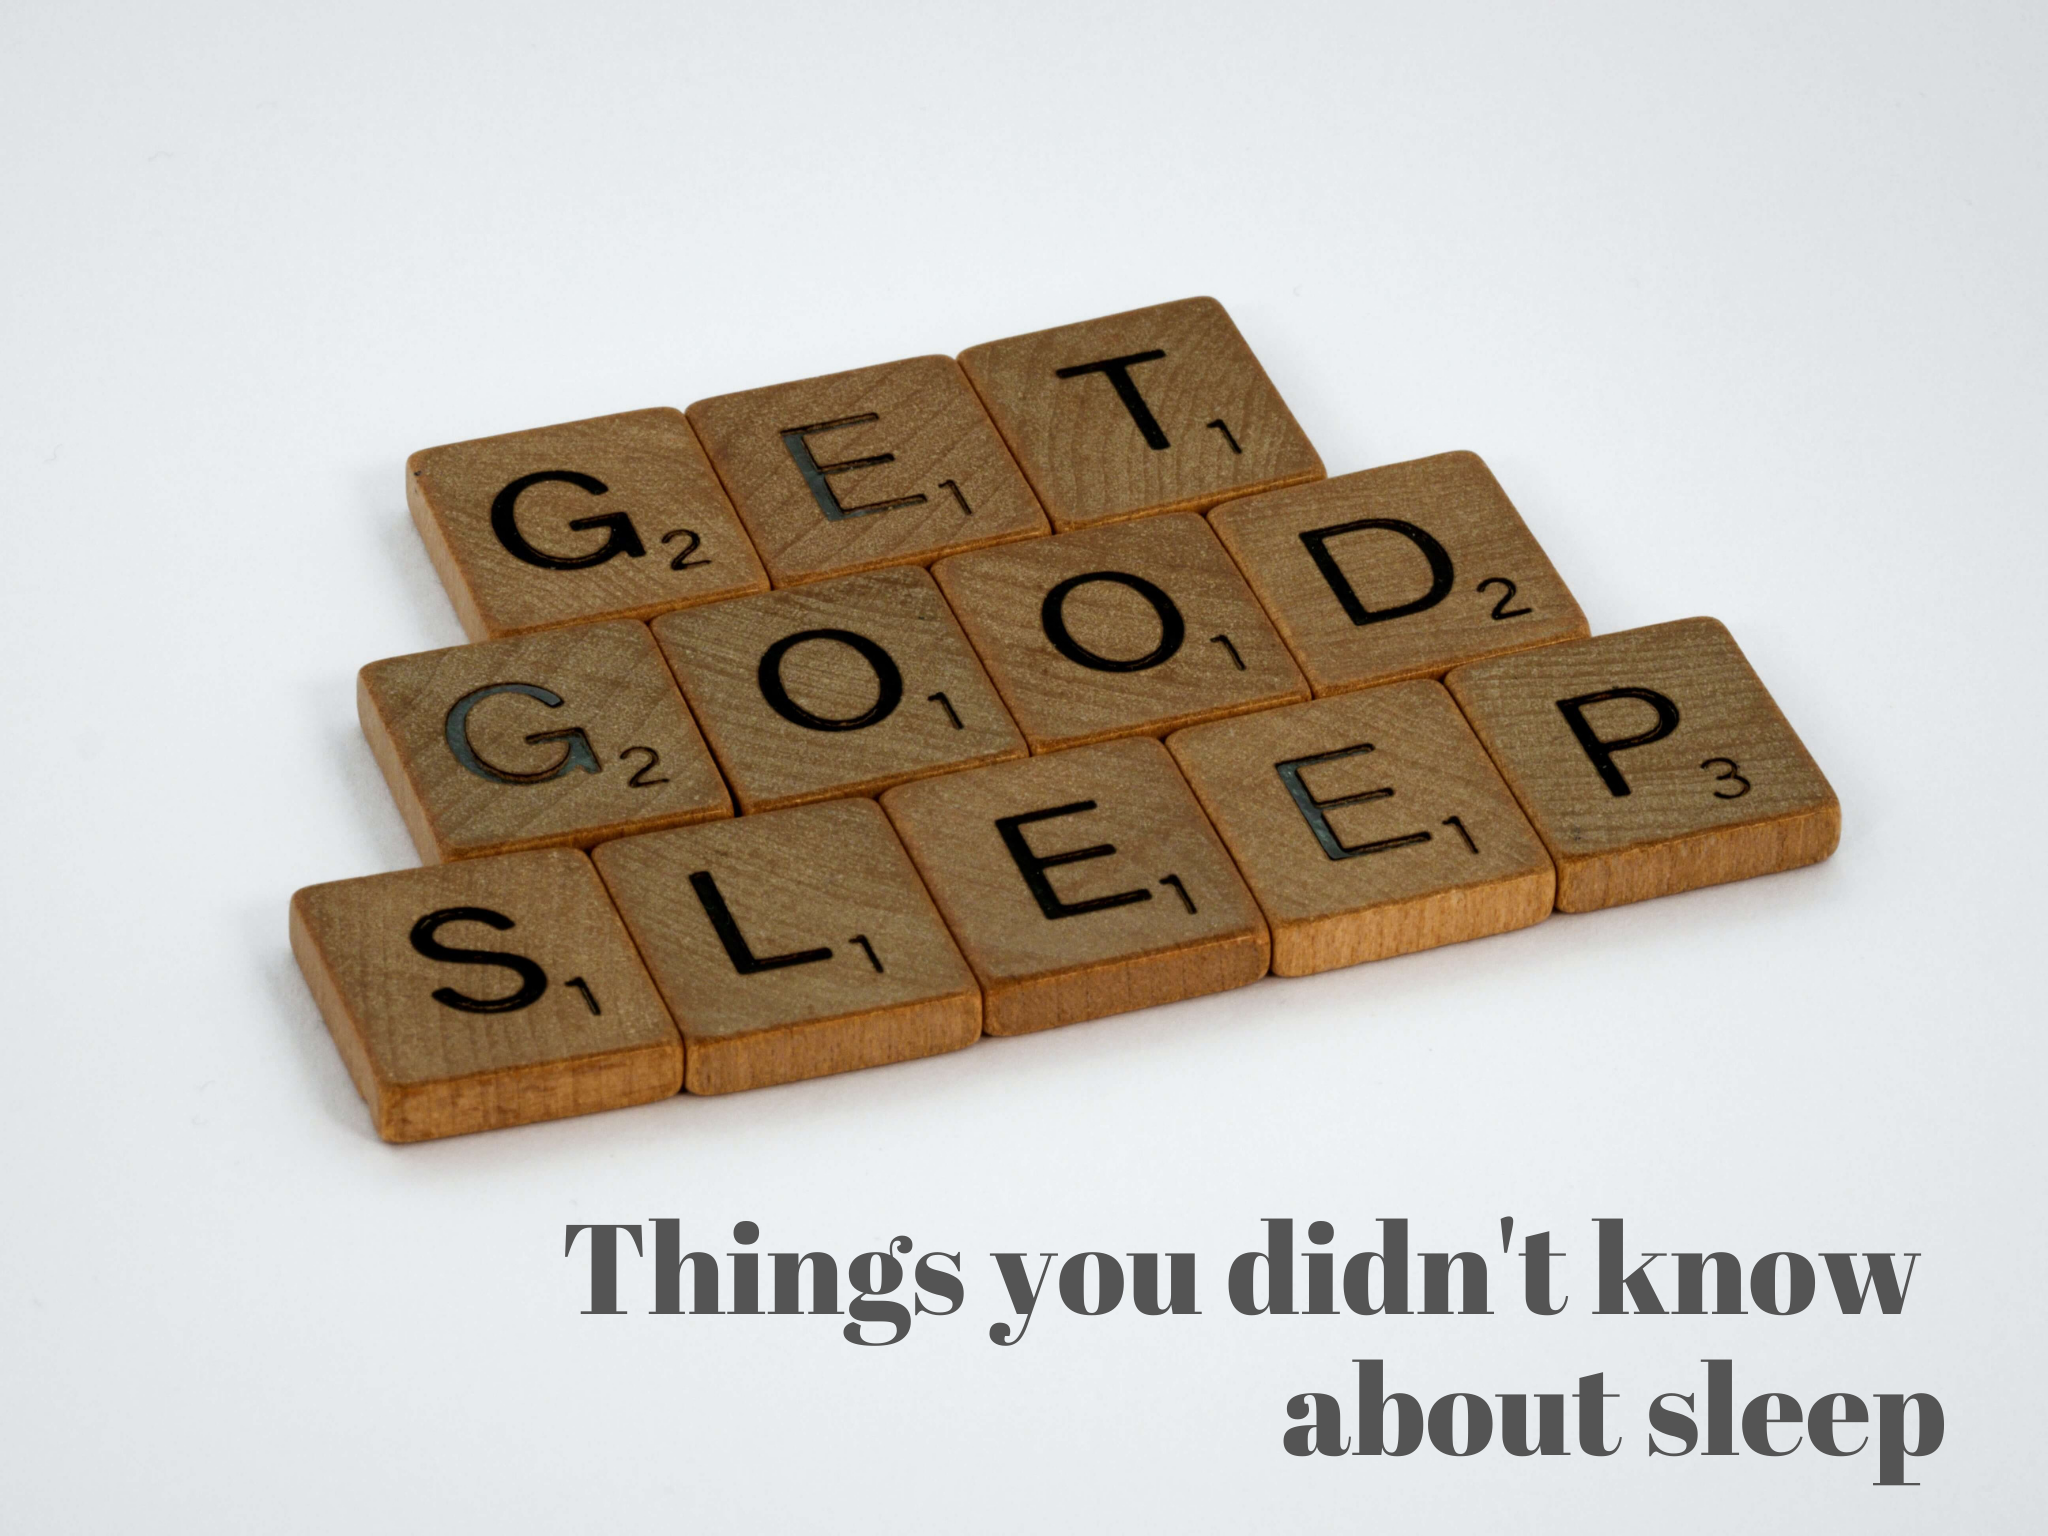 Things you didn't know about sleep